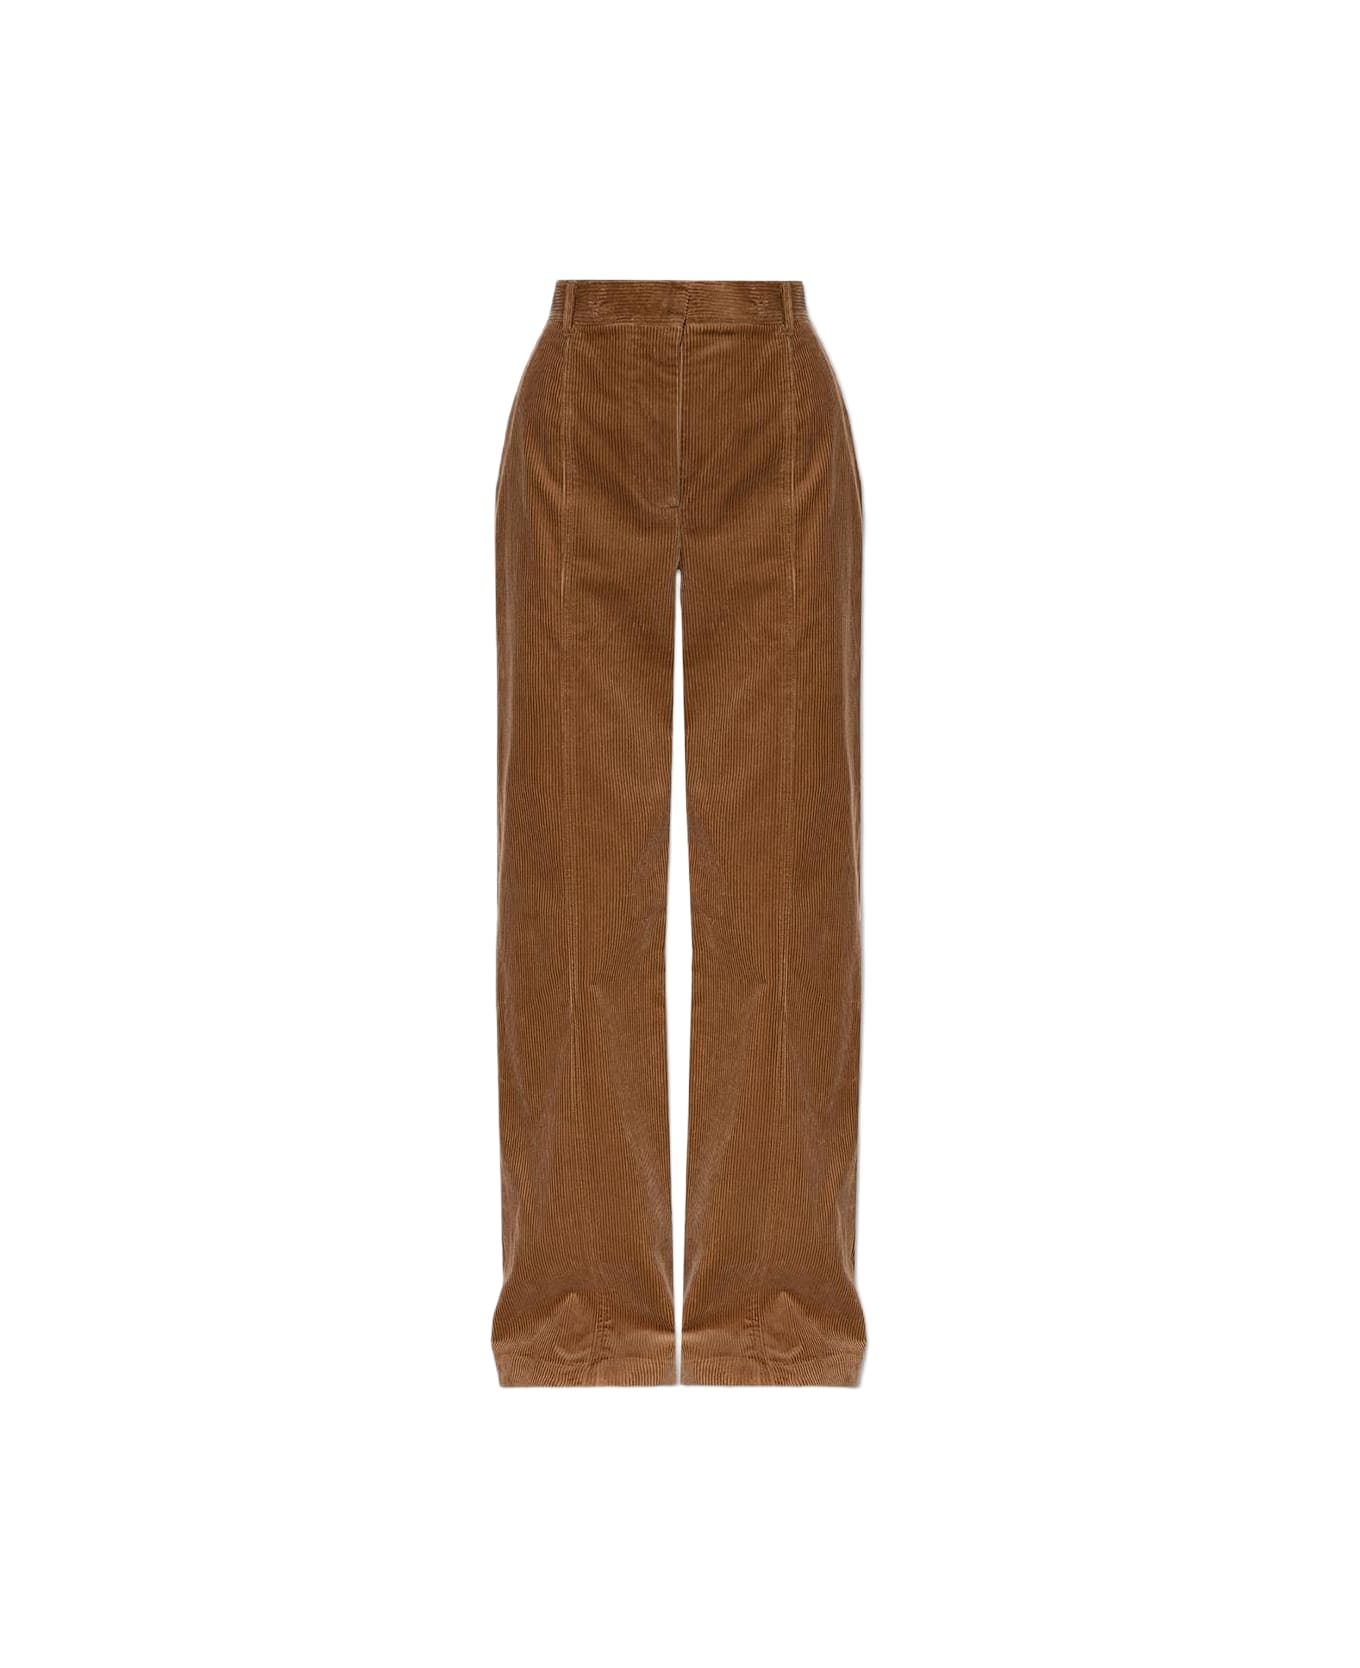 Burberry 'blakely' Corduroy Trousers - CAMEL